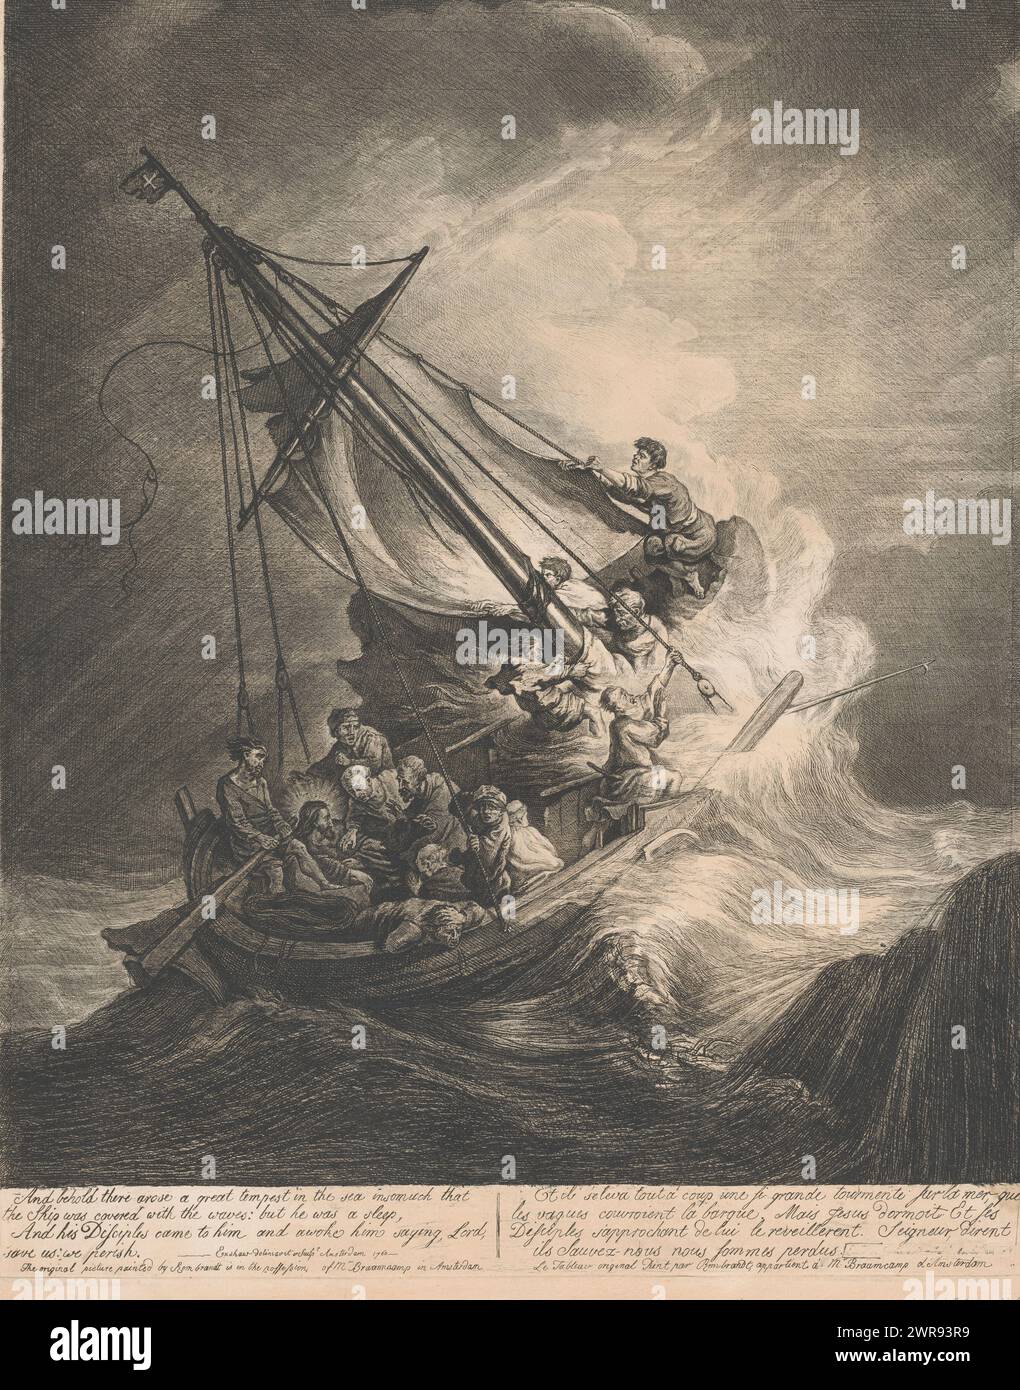 Christ in the storm on the Sea of Galilee, Christ sits on the left side of the boat and is awakened from his sleep by his disciples. With caption in English and French., print maker: Charles Exshaw, after own design by: Charles Exshaw, after painting by: Rembrandt van Rijn, Amsterdam, 1760, paper, etching, drypoint, height 644 mm × width 509 mm, print Stock Photo